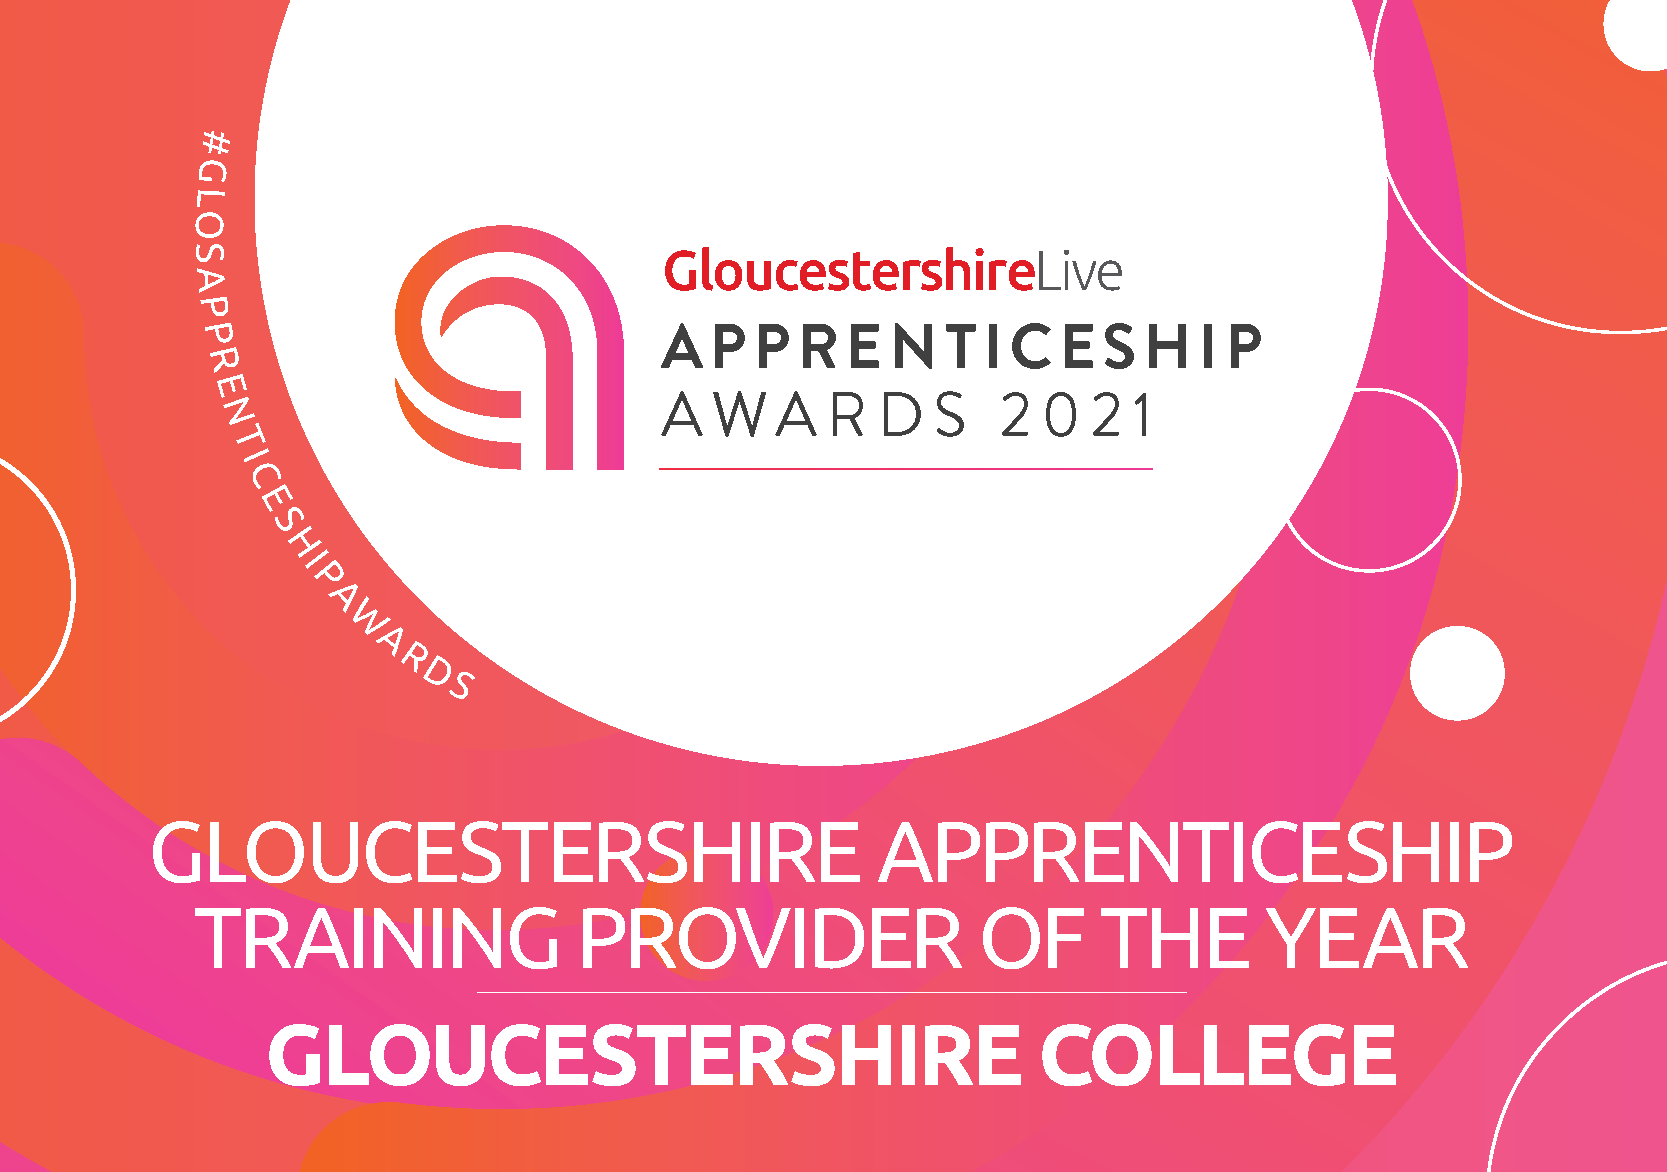 Gloucestershire College hailed as Apprenticeship Training Provider of the Year 2021